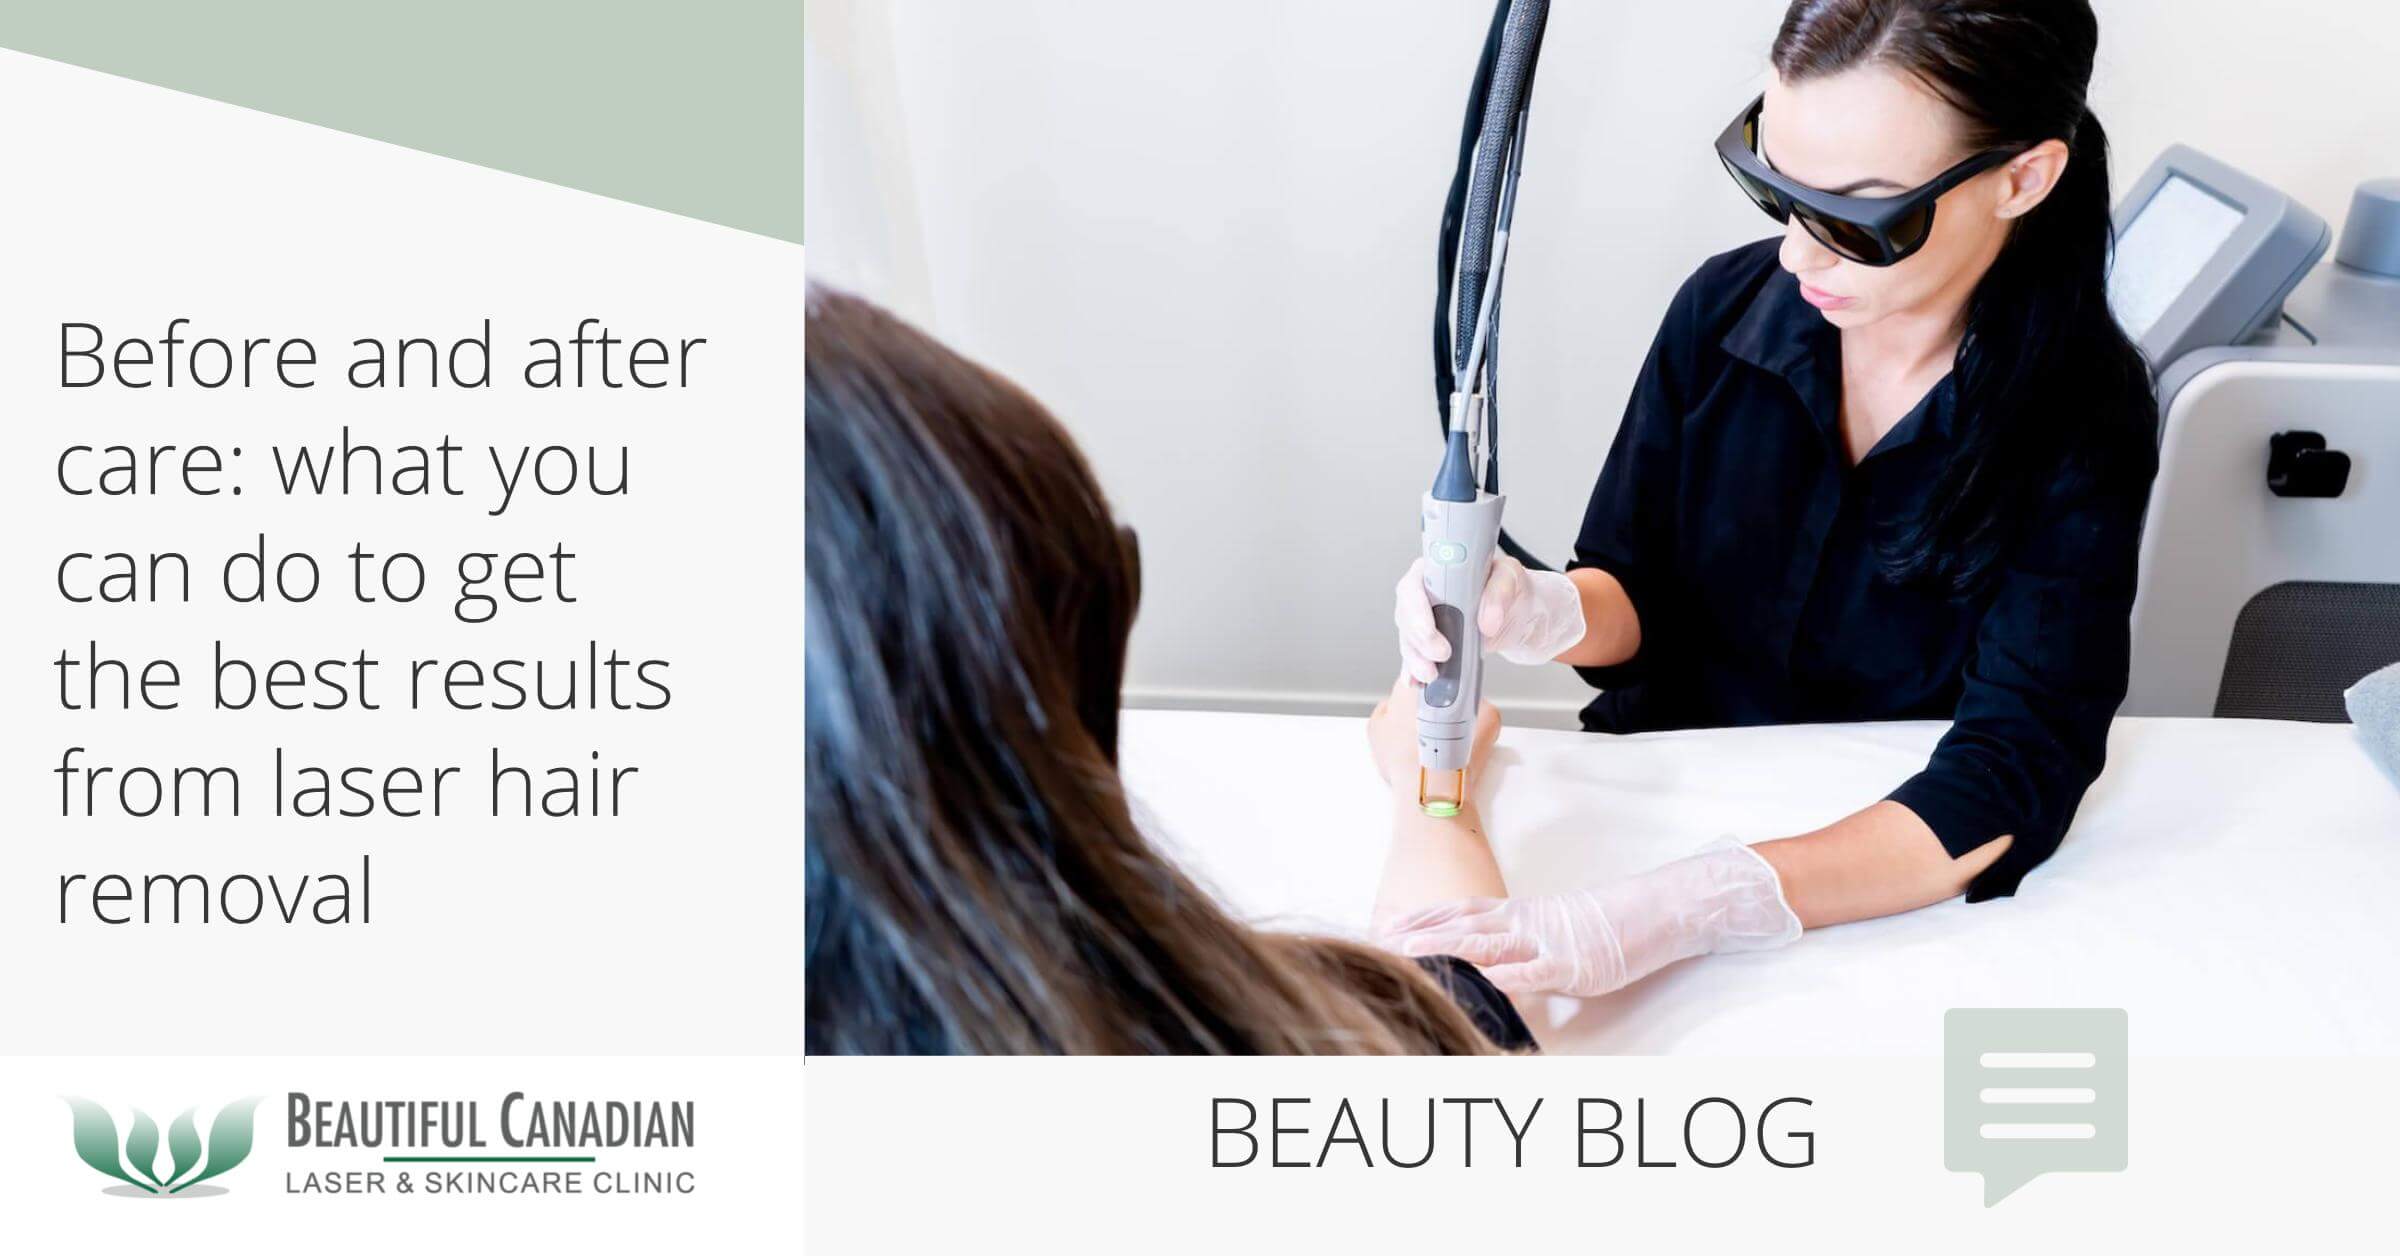 Before and After Care: Get the Best Results from Laser Hair Removal